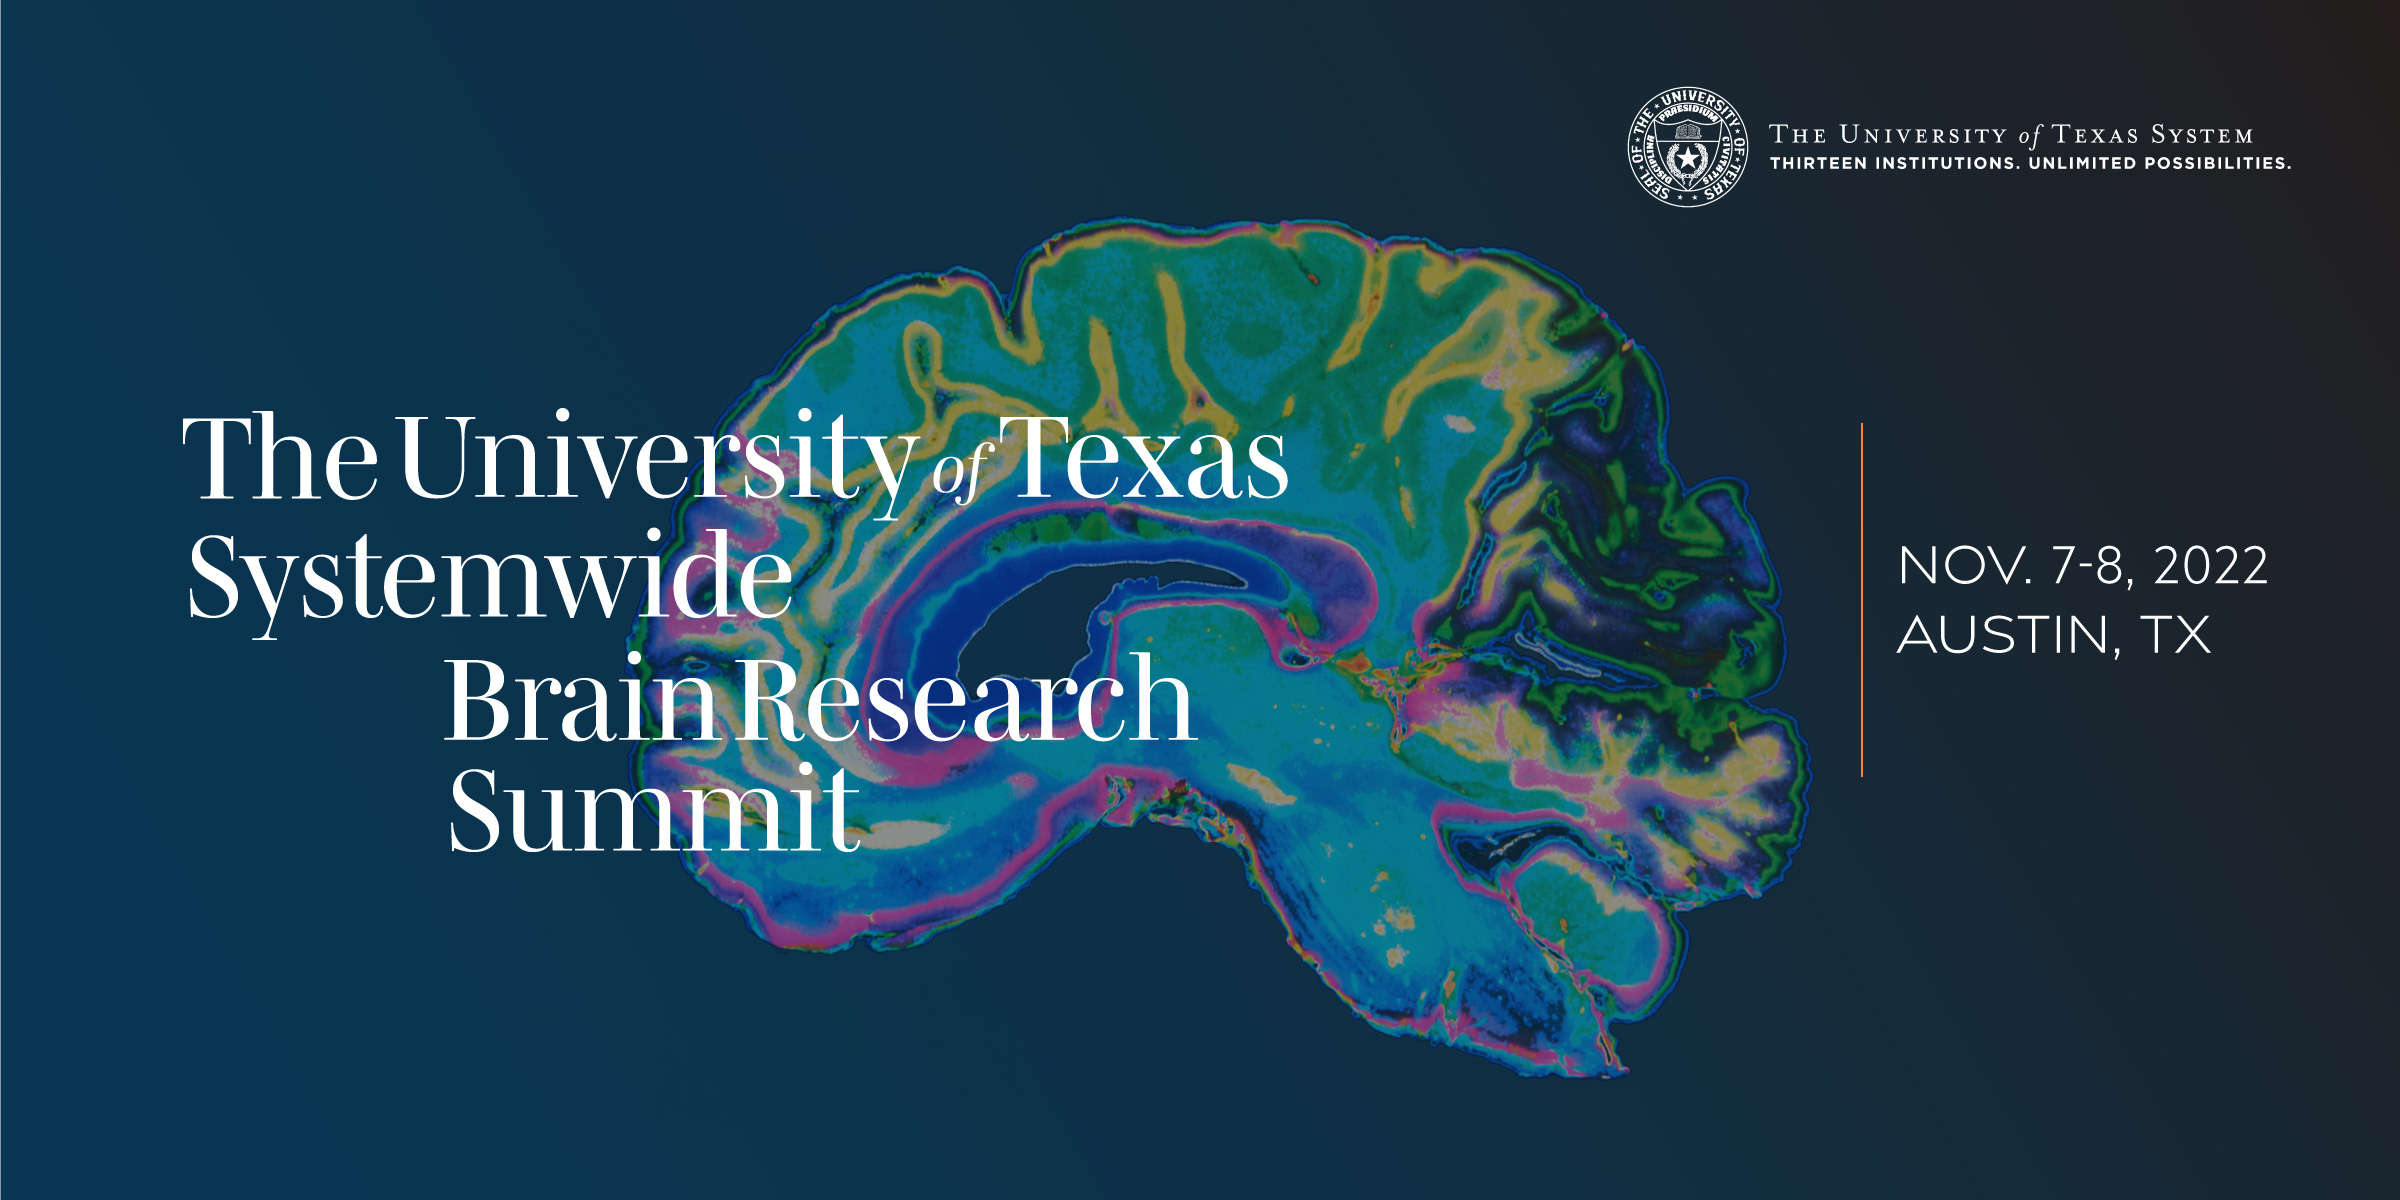 The University of Texas Systemwide Brain Research Summit